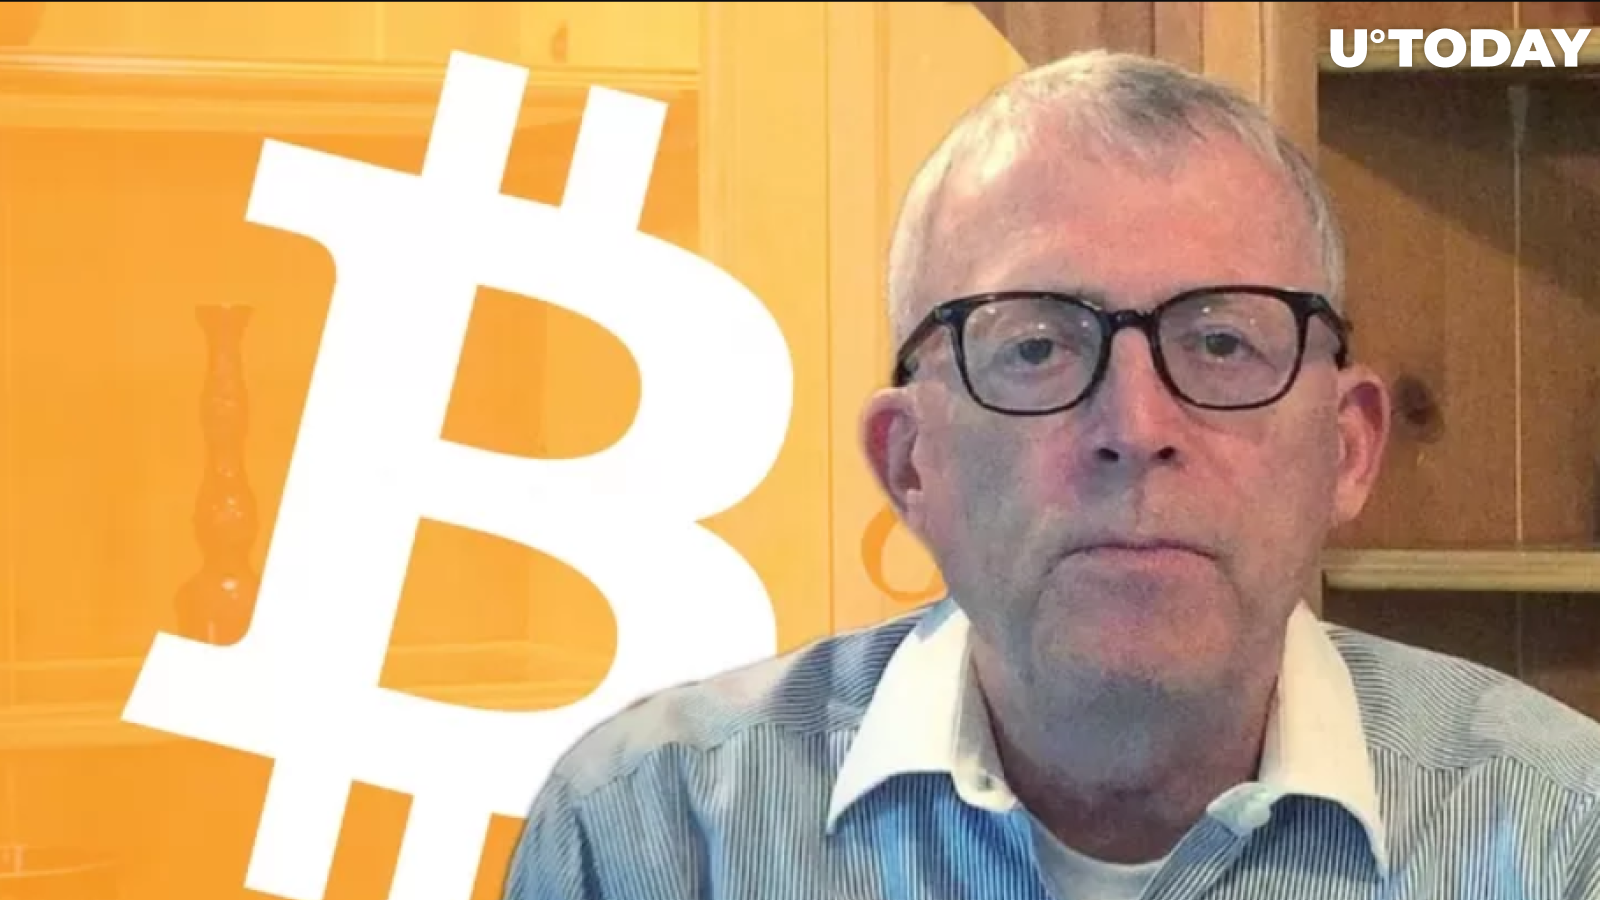 Bitcoin (BTC) Remains in Bear Market, According to Trading Legend Peter Brandt